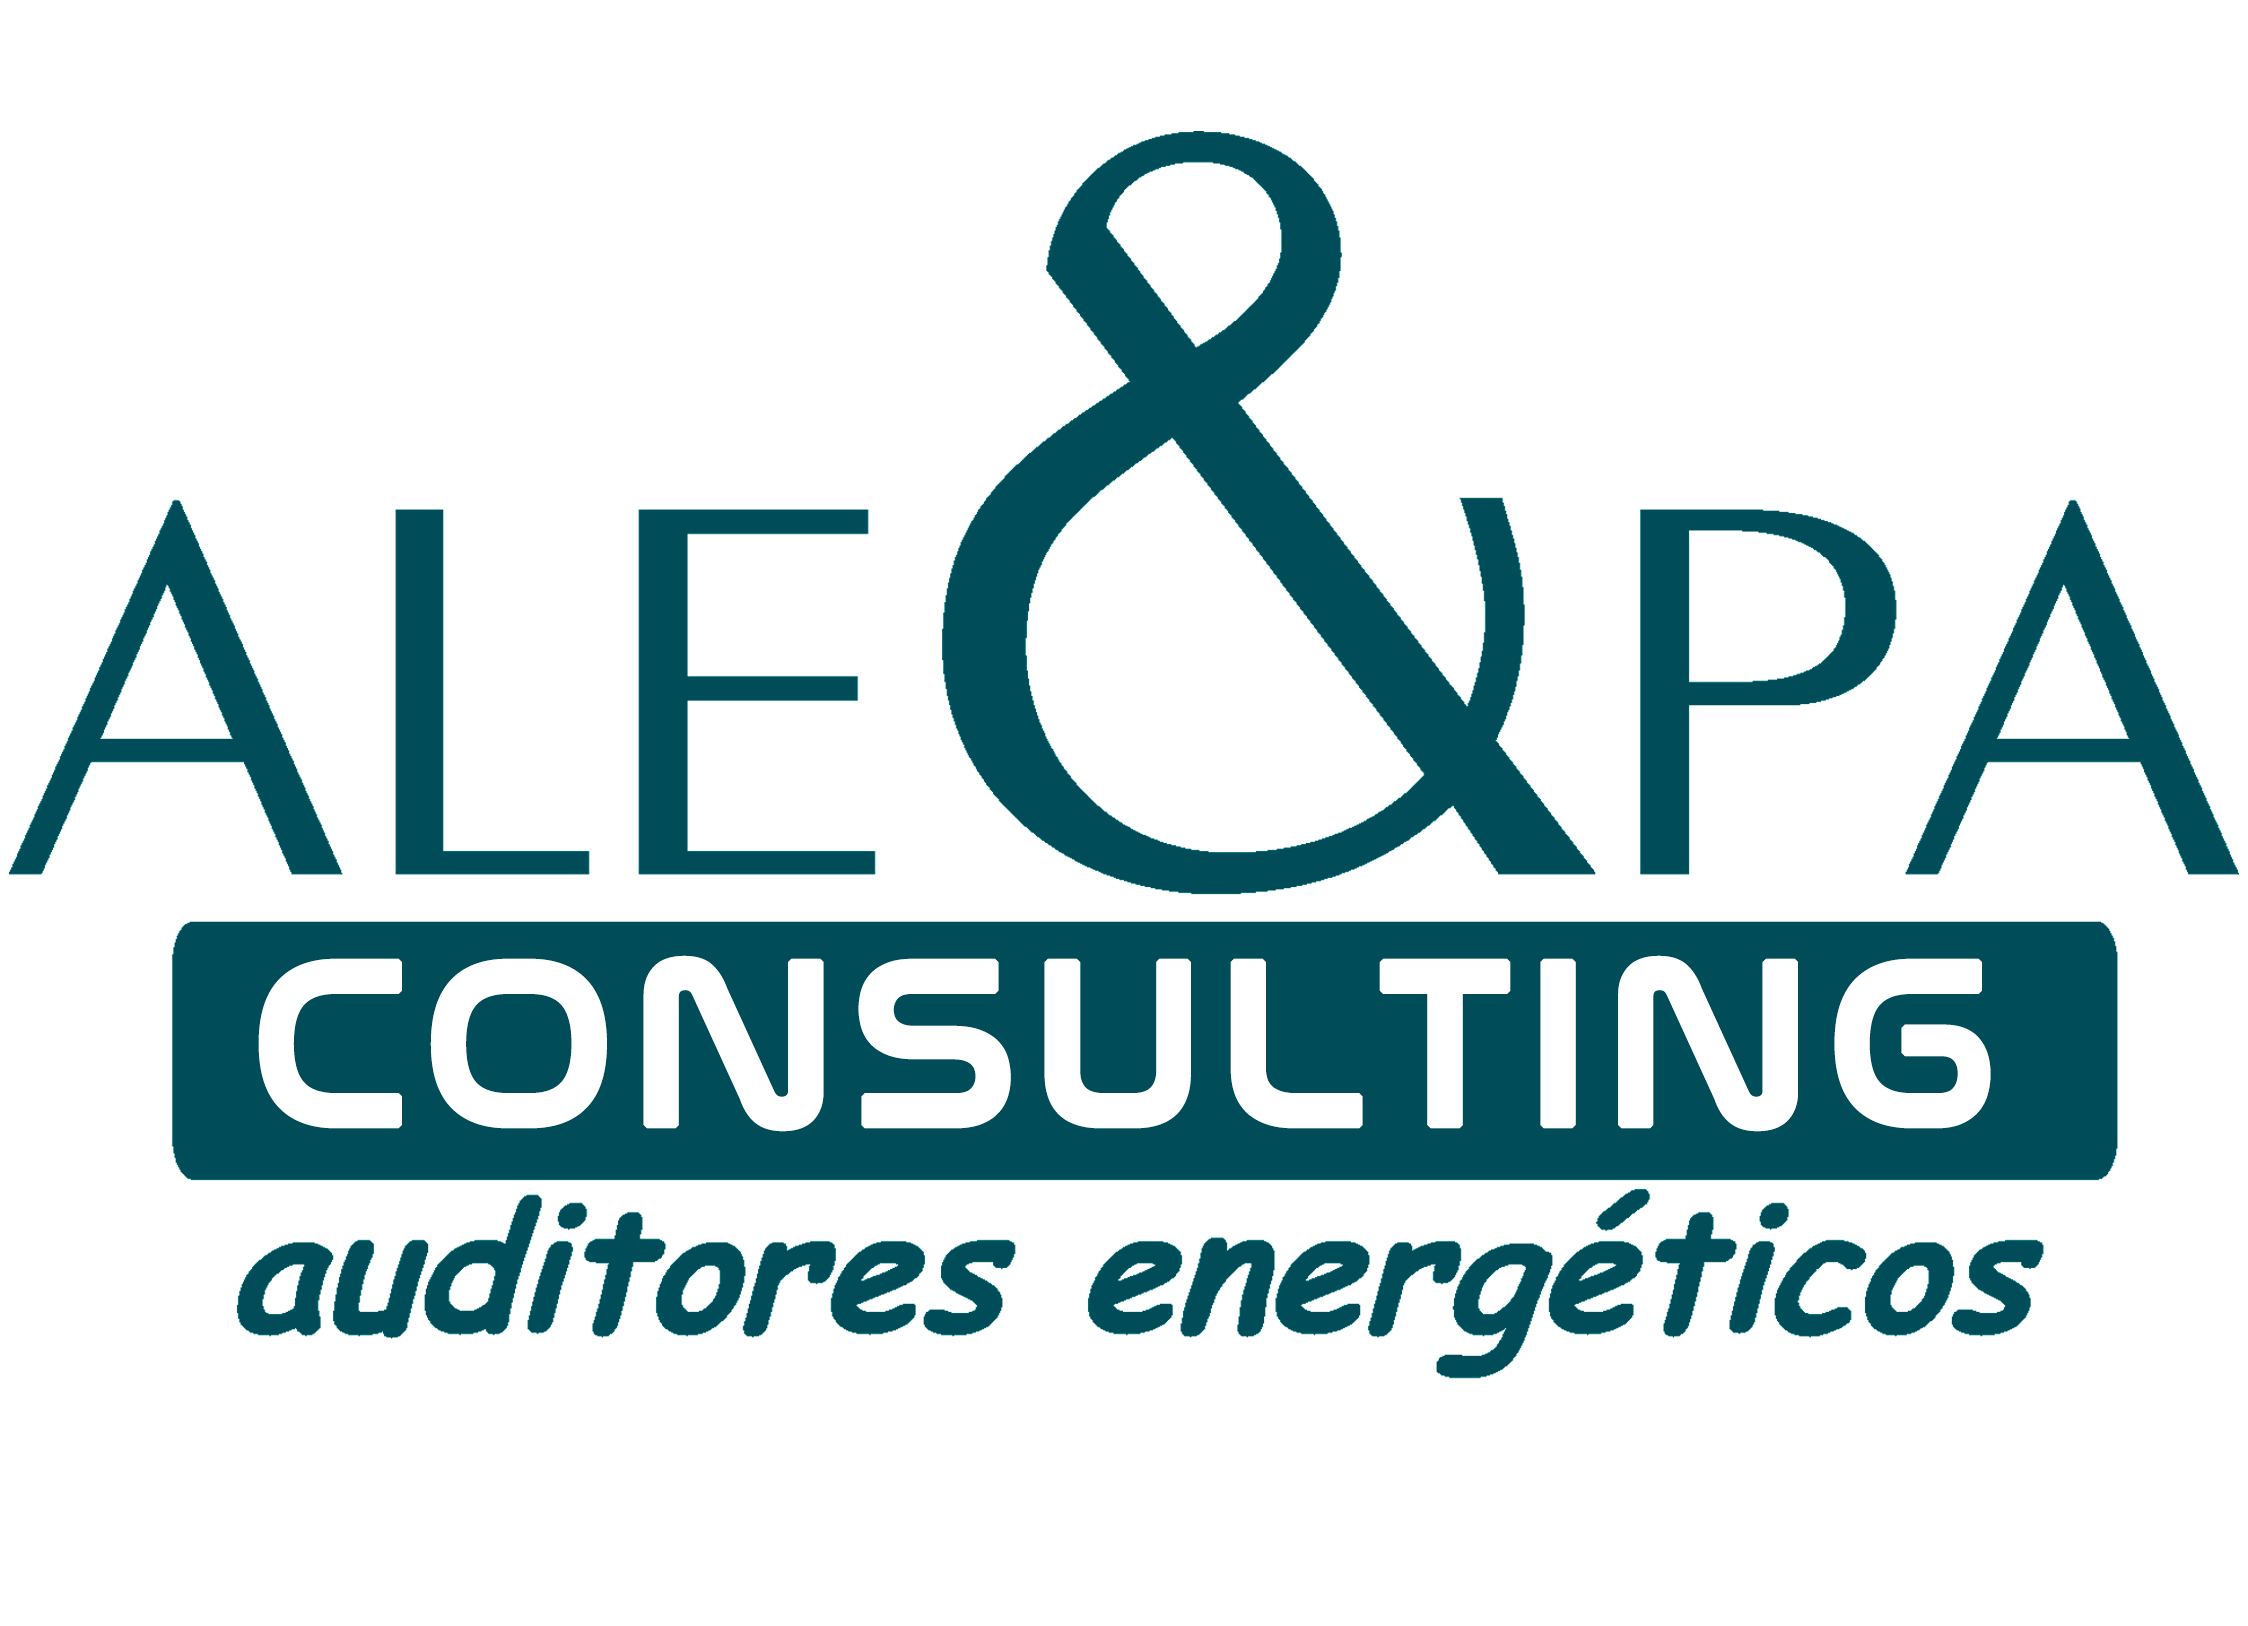 Ale&pa consulting